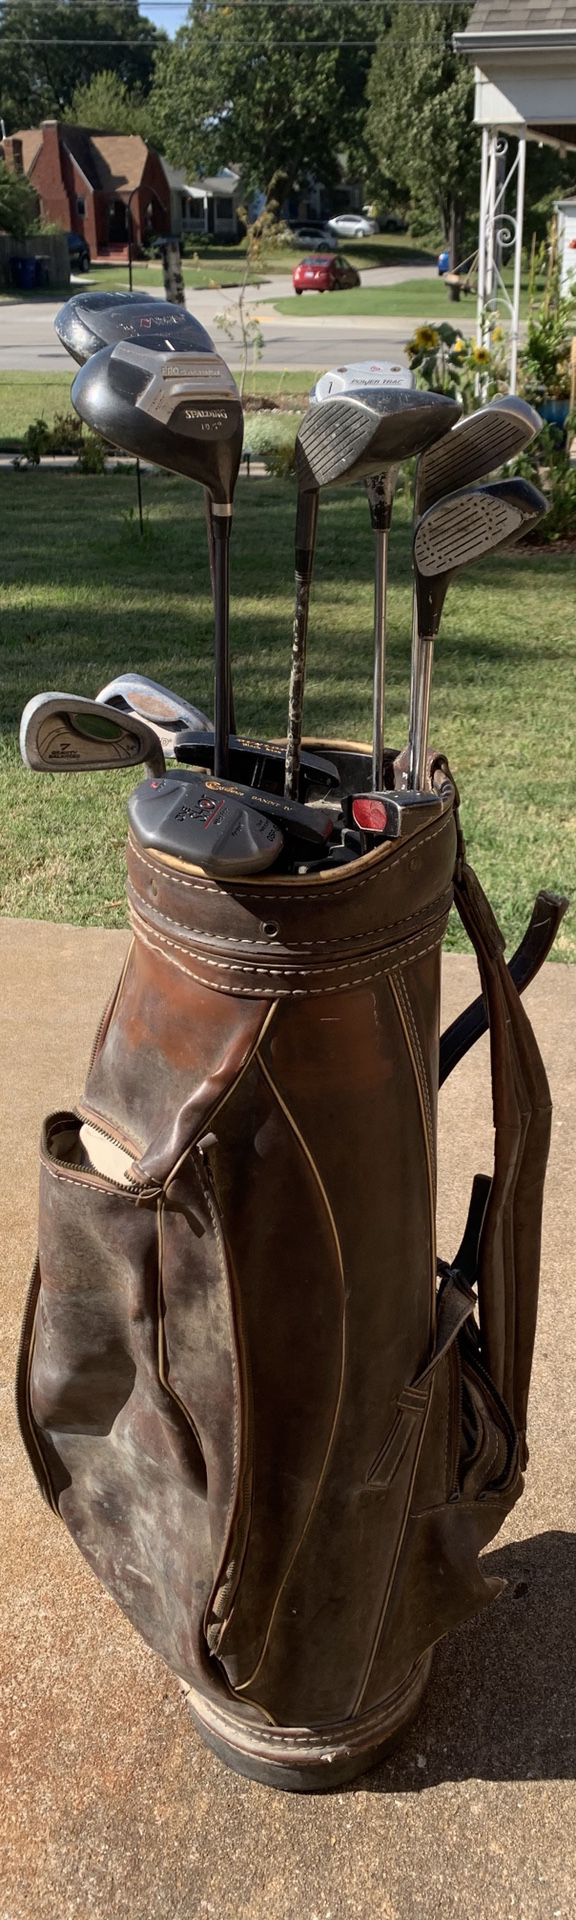 Golf Clubs And Leather Palmer Bag 